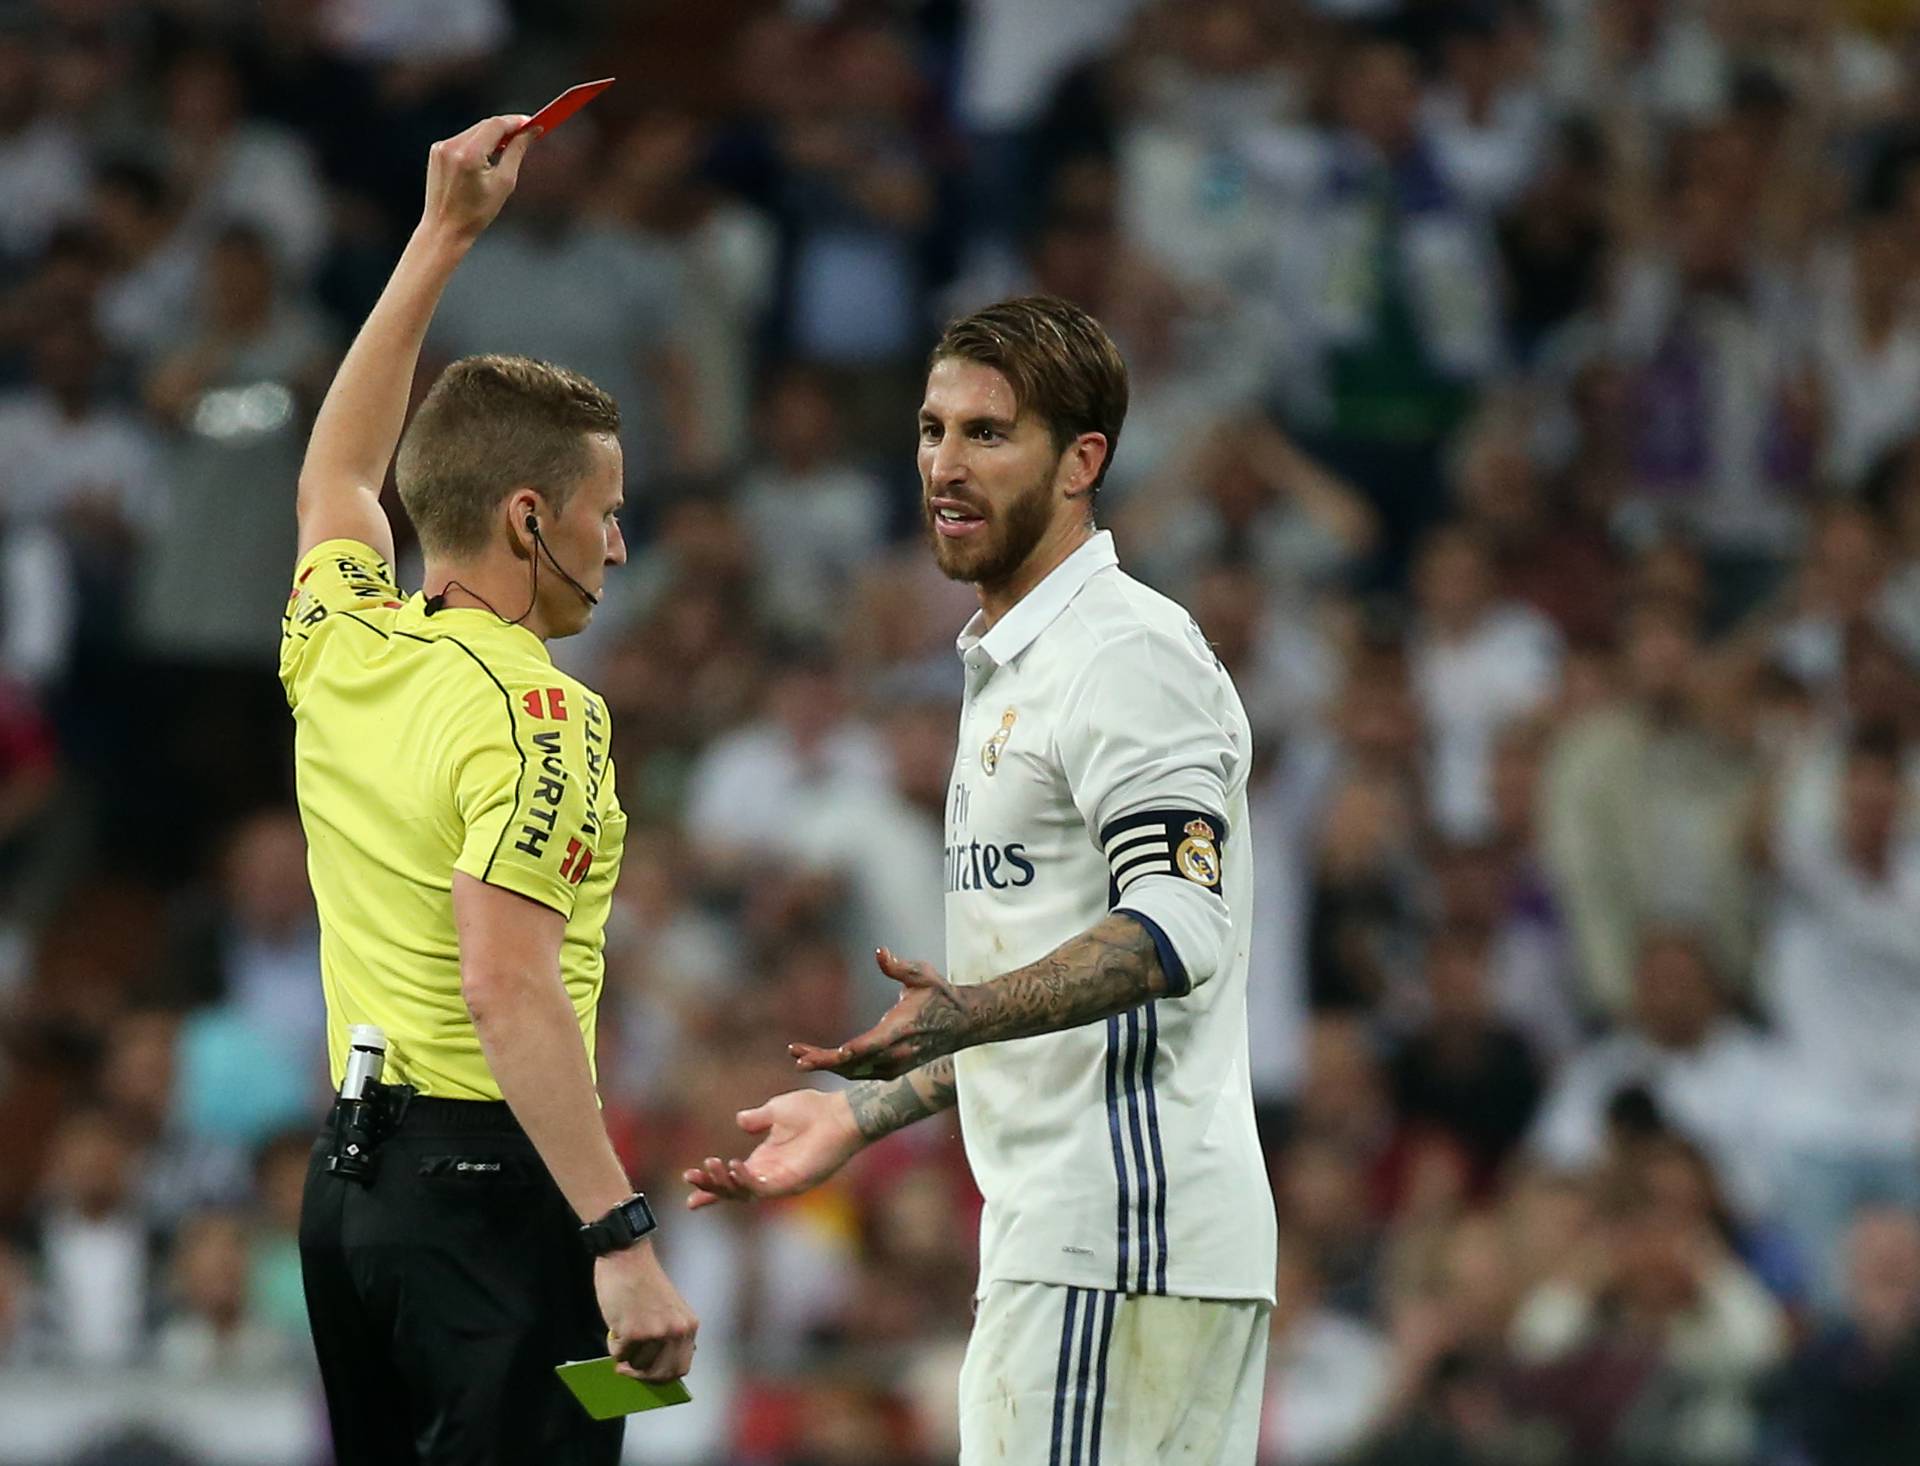 Real Madrid's Sergio Ramos is shown a red card by referee Alejandro Hernandez